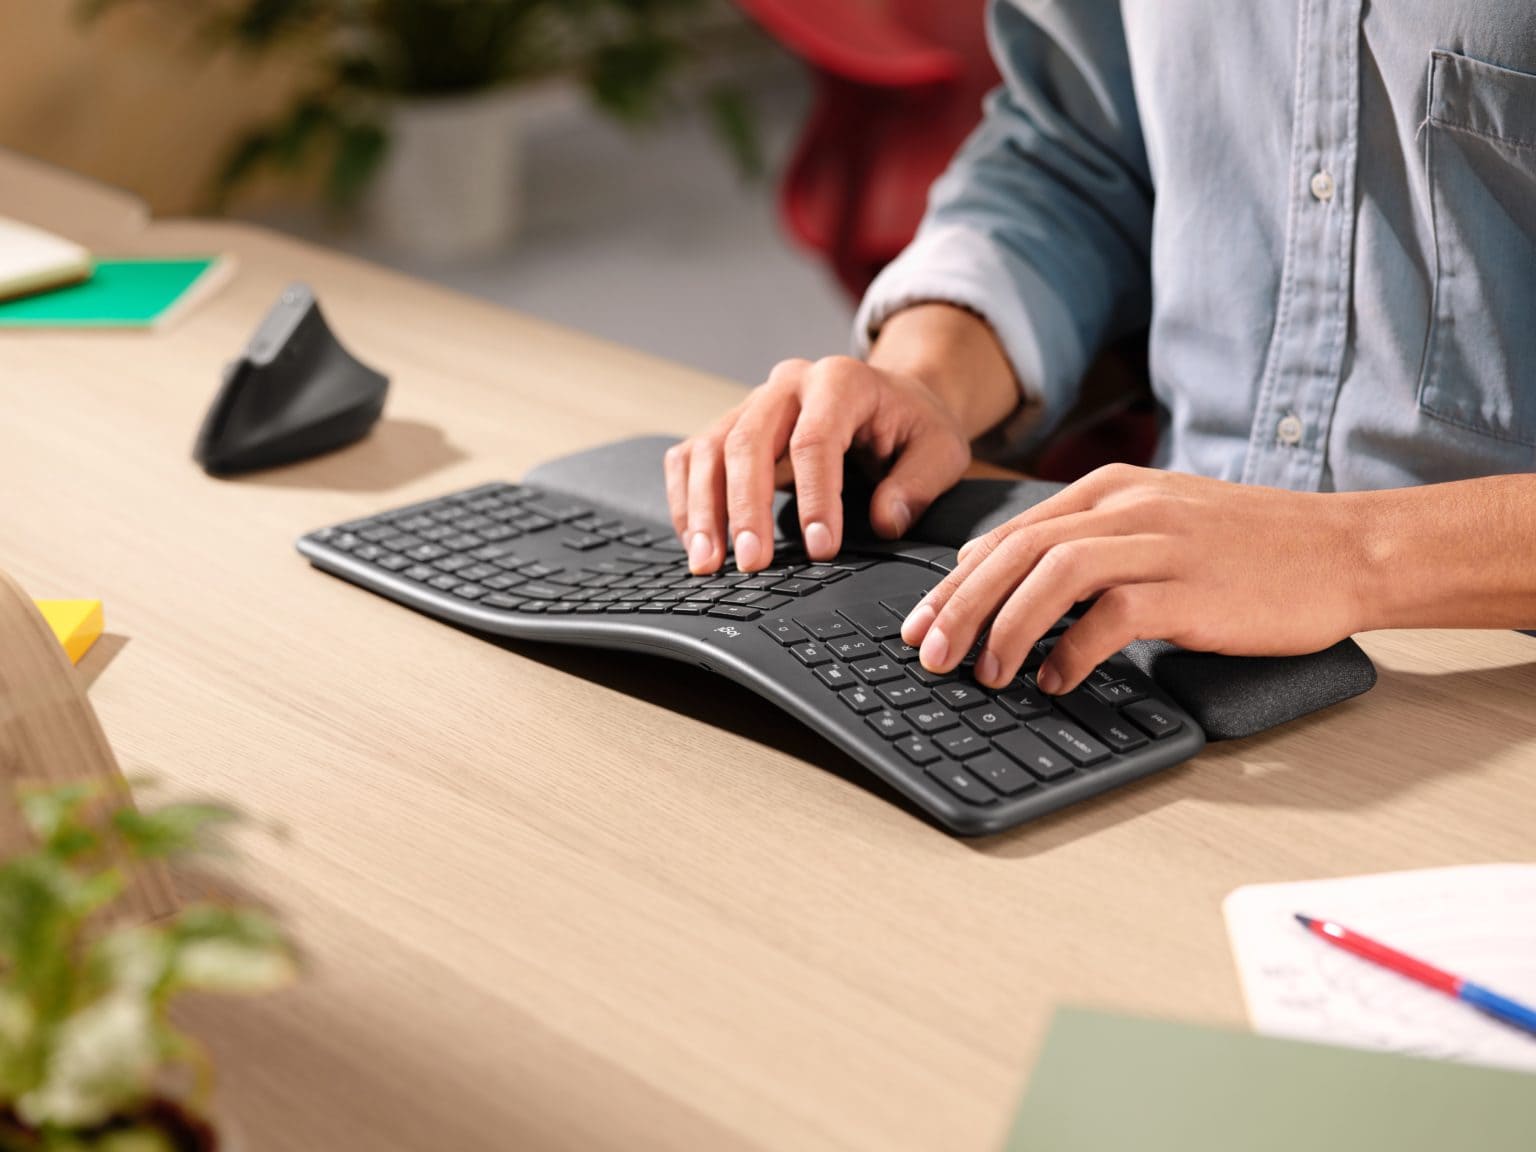 With an ergonomic split design and a fancy wrist rest, the Logitech Ergo K860 keyboard delivers comfortable typing.